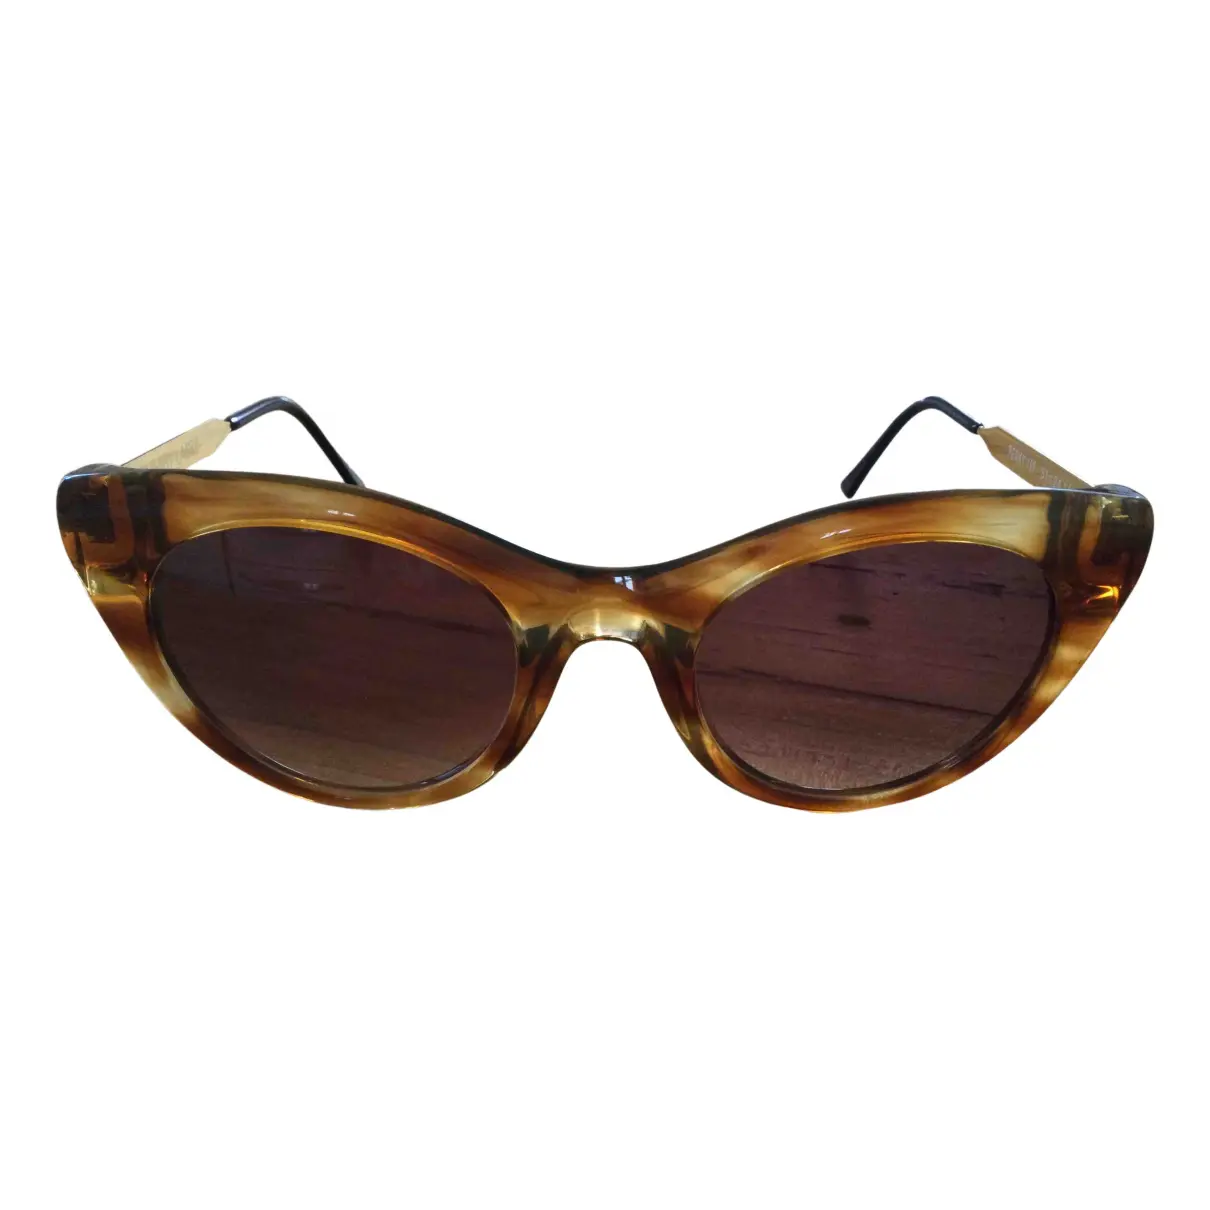 Sunglasses Thierry Lasry